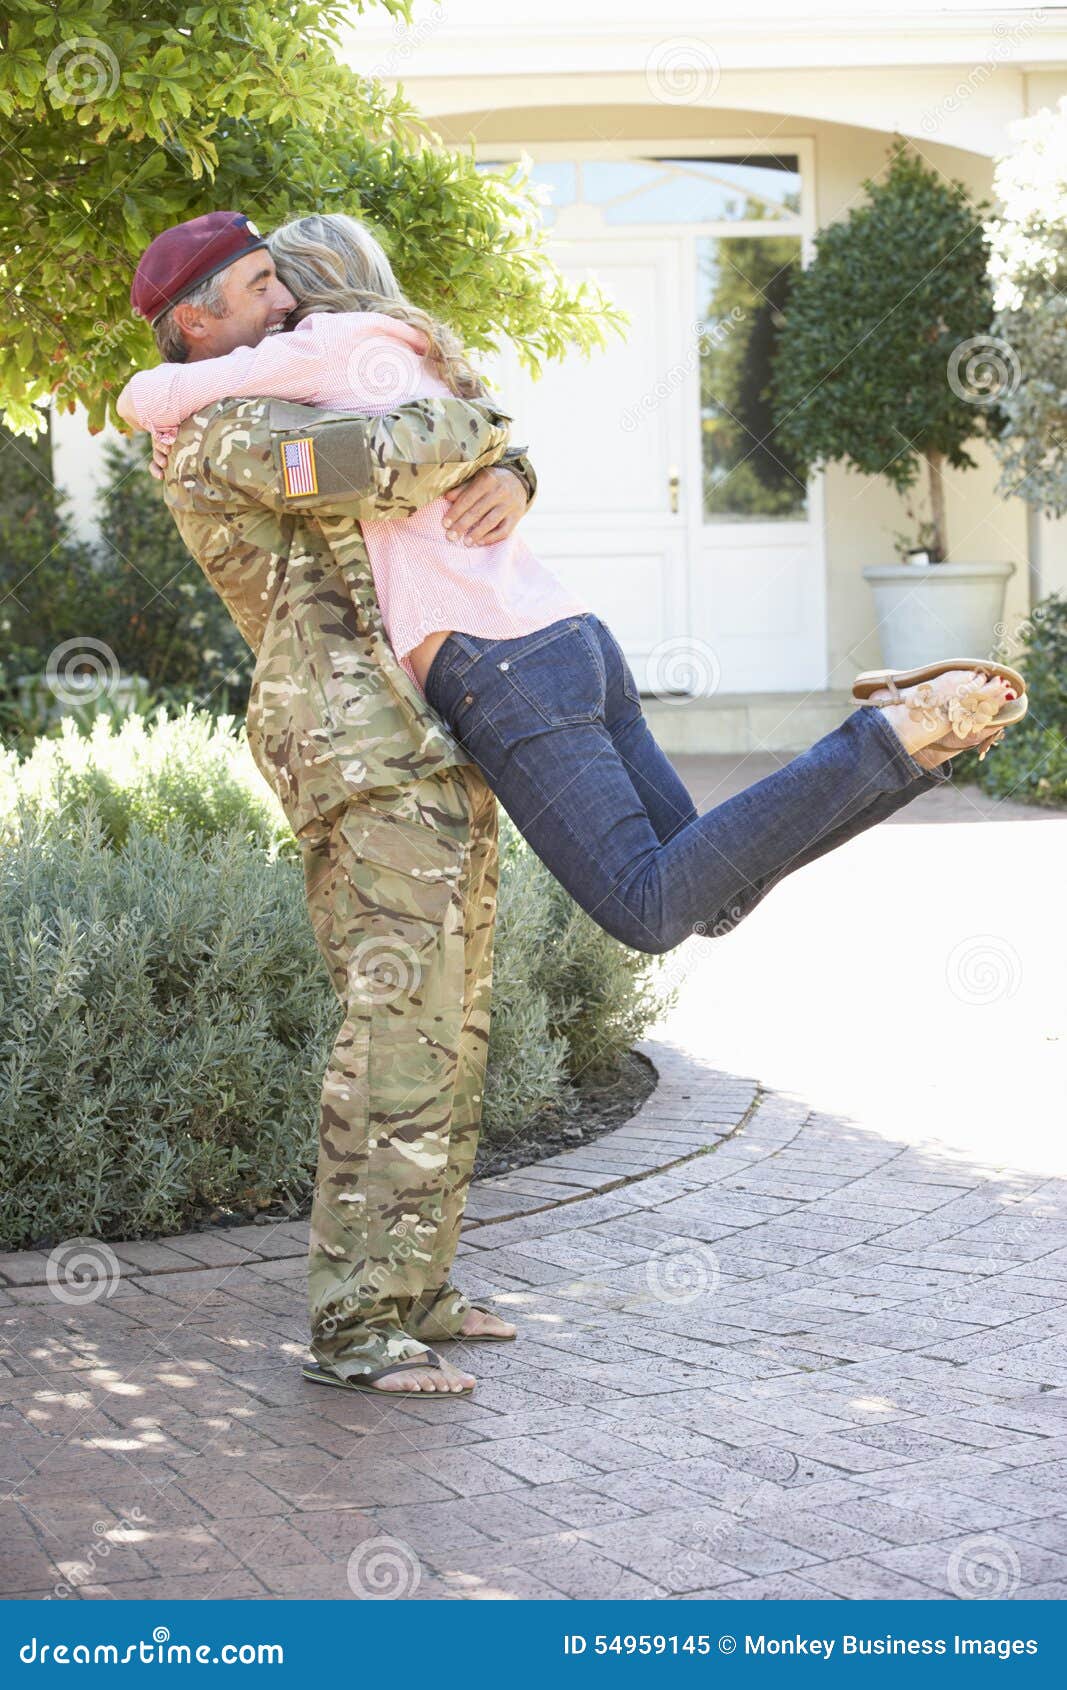 wifey welcoming home young soldier Adult Pictures